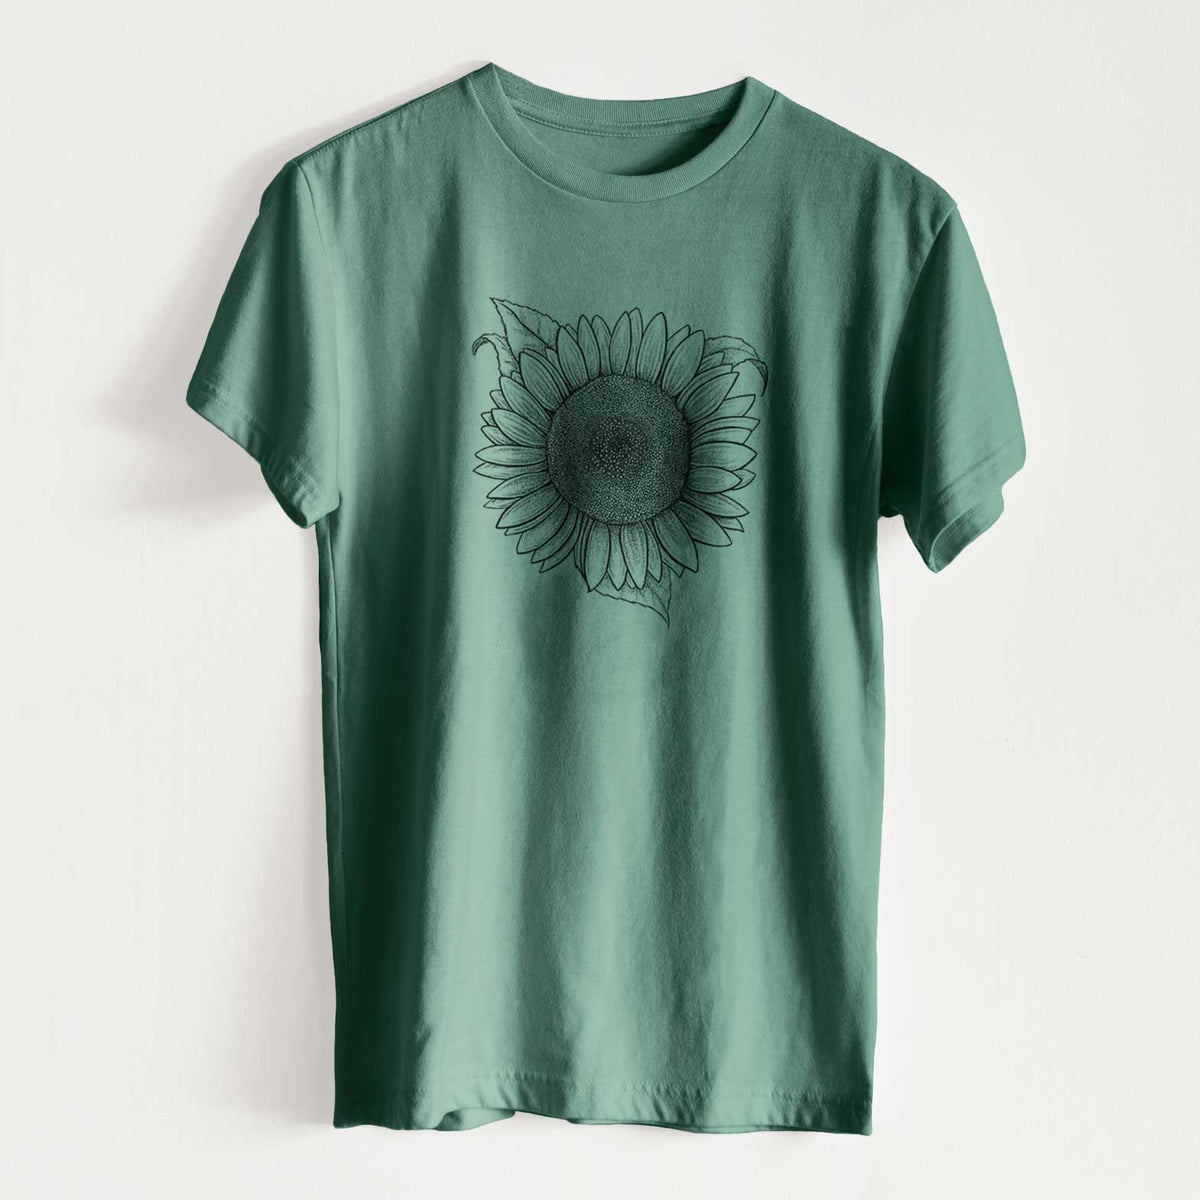 Lemon Queen Sunflower - Helianthus Annuus - Unisex Recycled Eco Tee  - CLOSEOUT - FINAL SALE